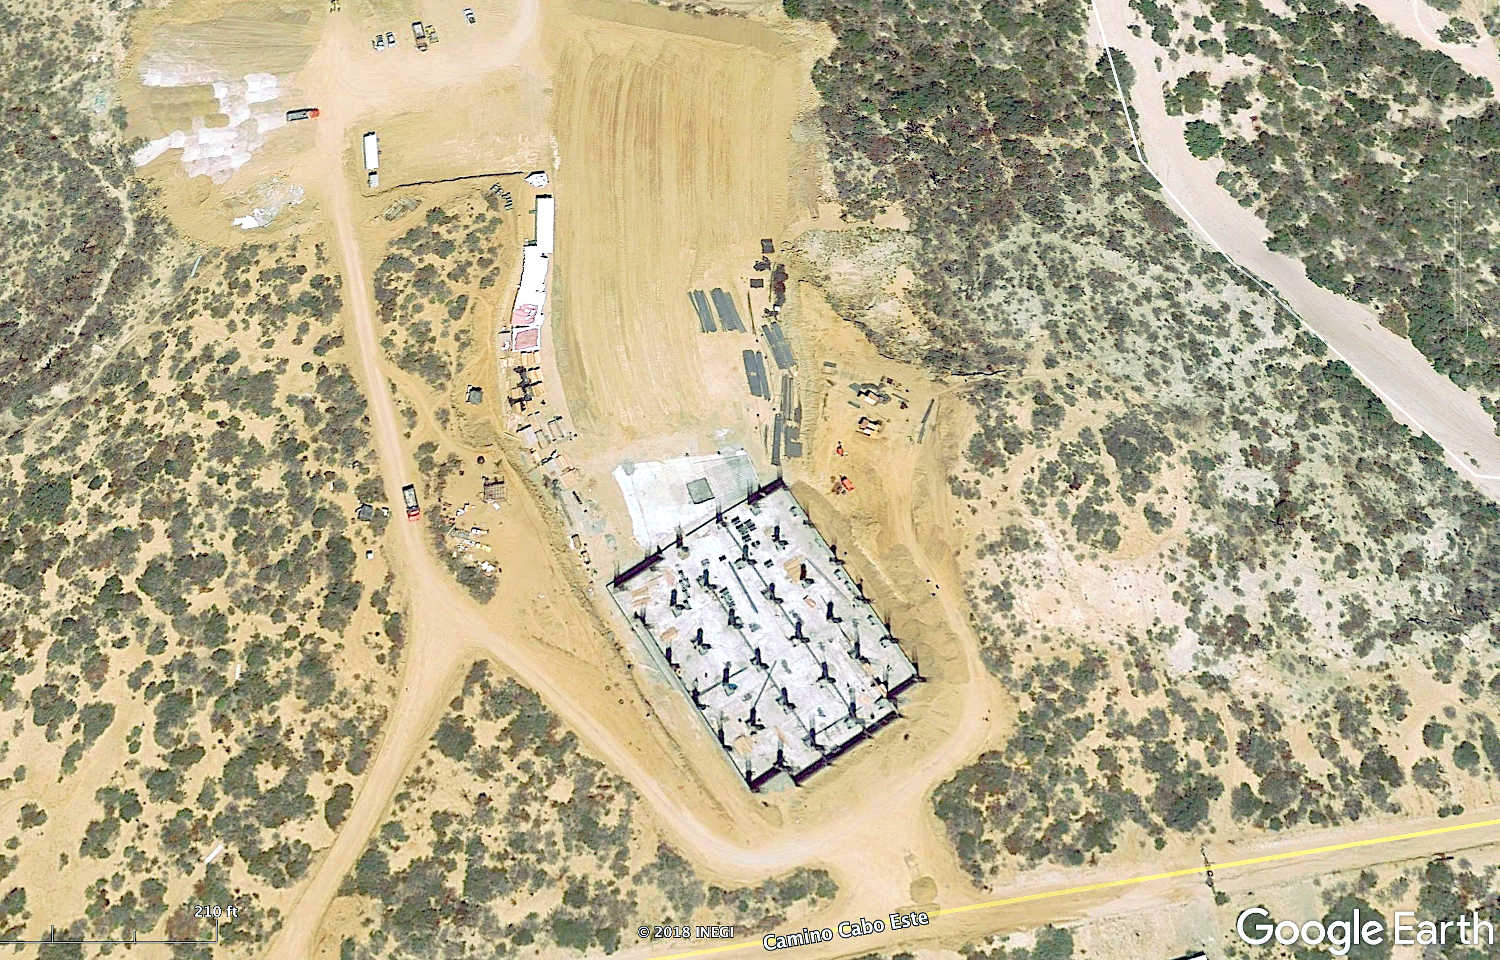 Google Earth images show a tower under construction and a sales office at the top of a knoll.  Stay tuned.  Subscribers View - 5/29/18